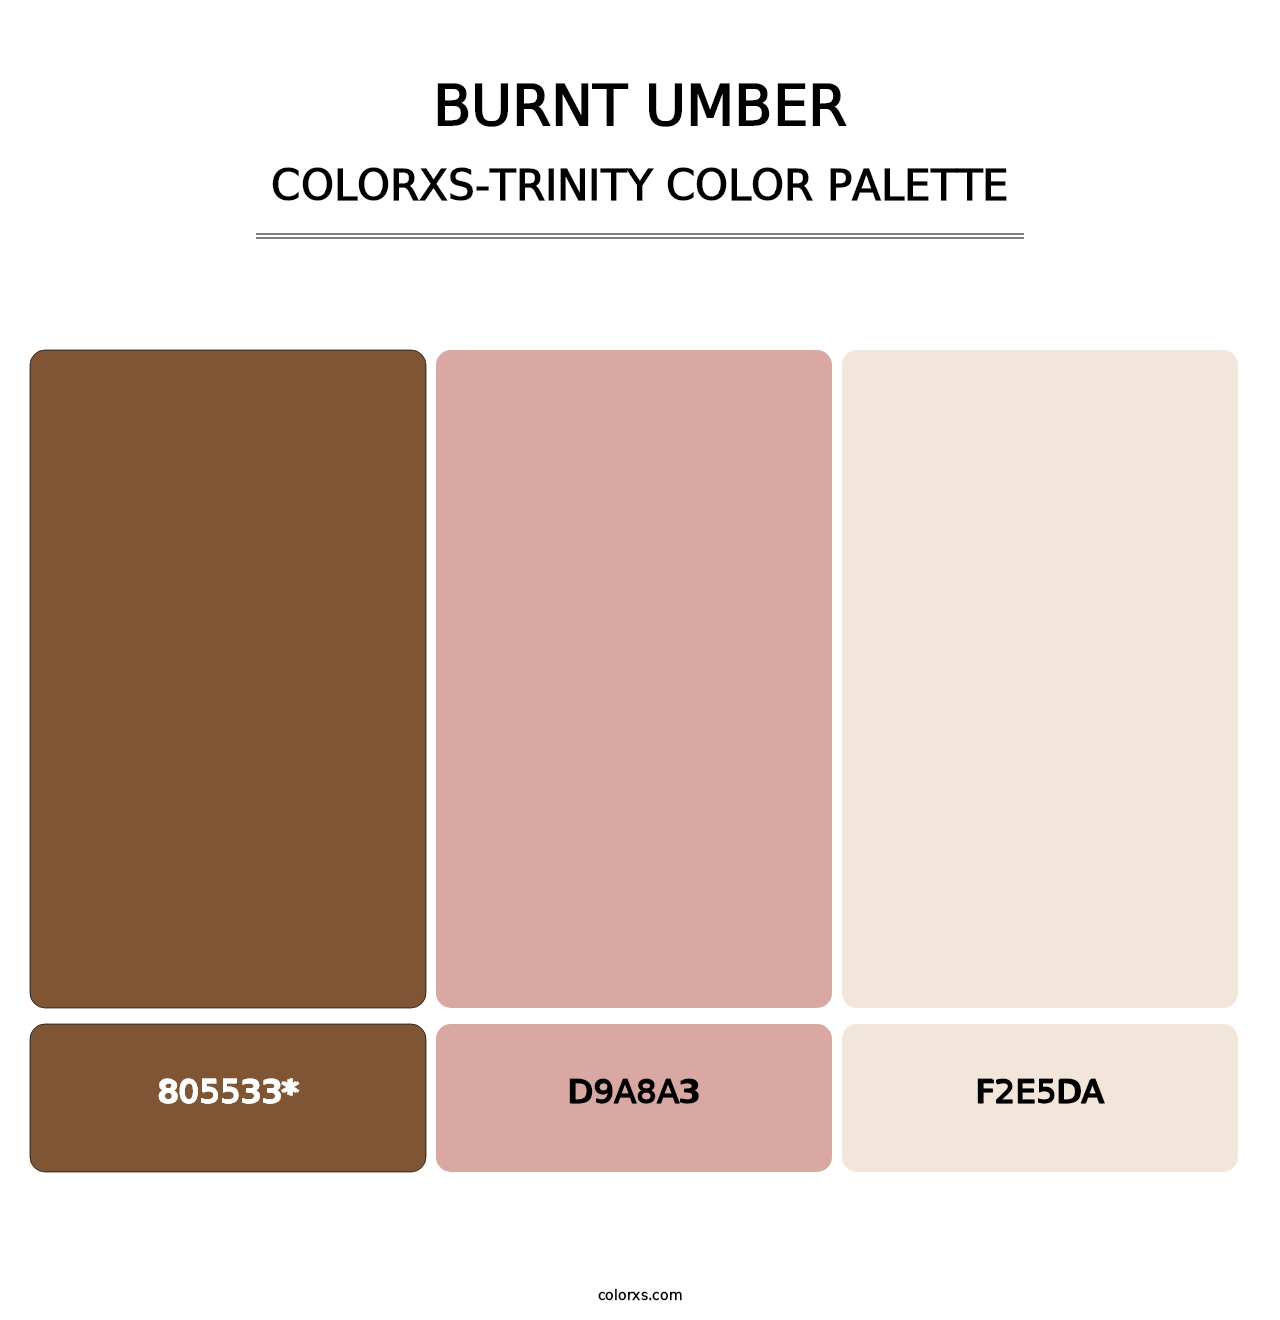 Burnt Umber - Colorxs Trinity Palette